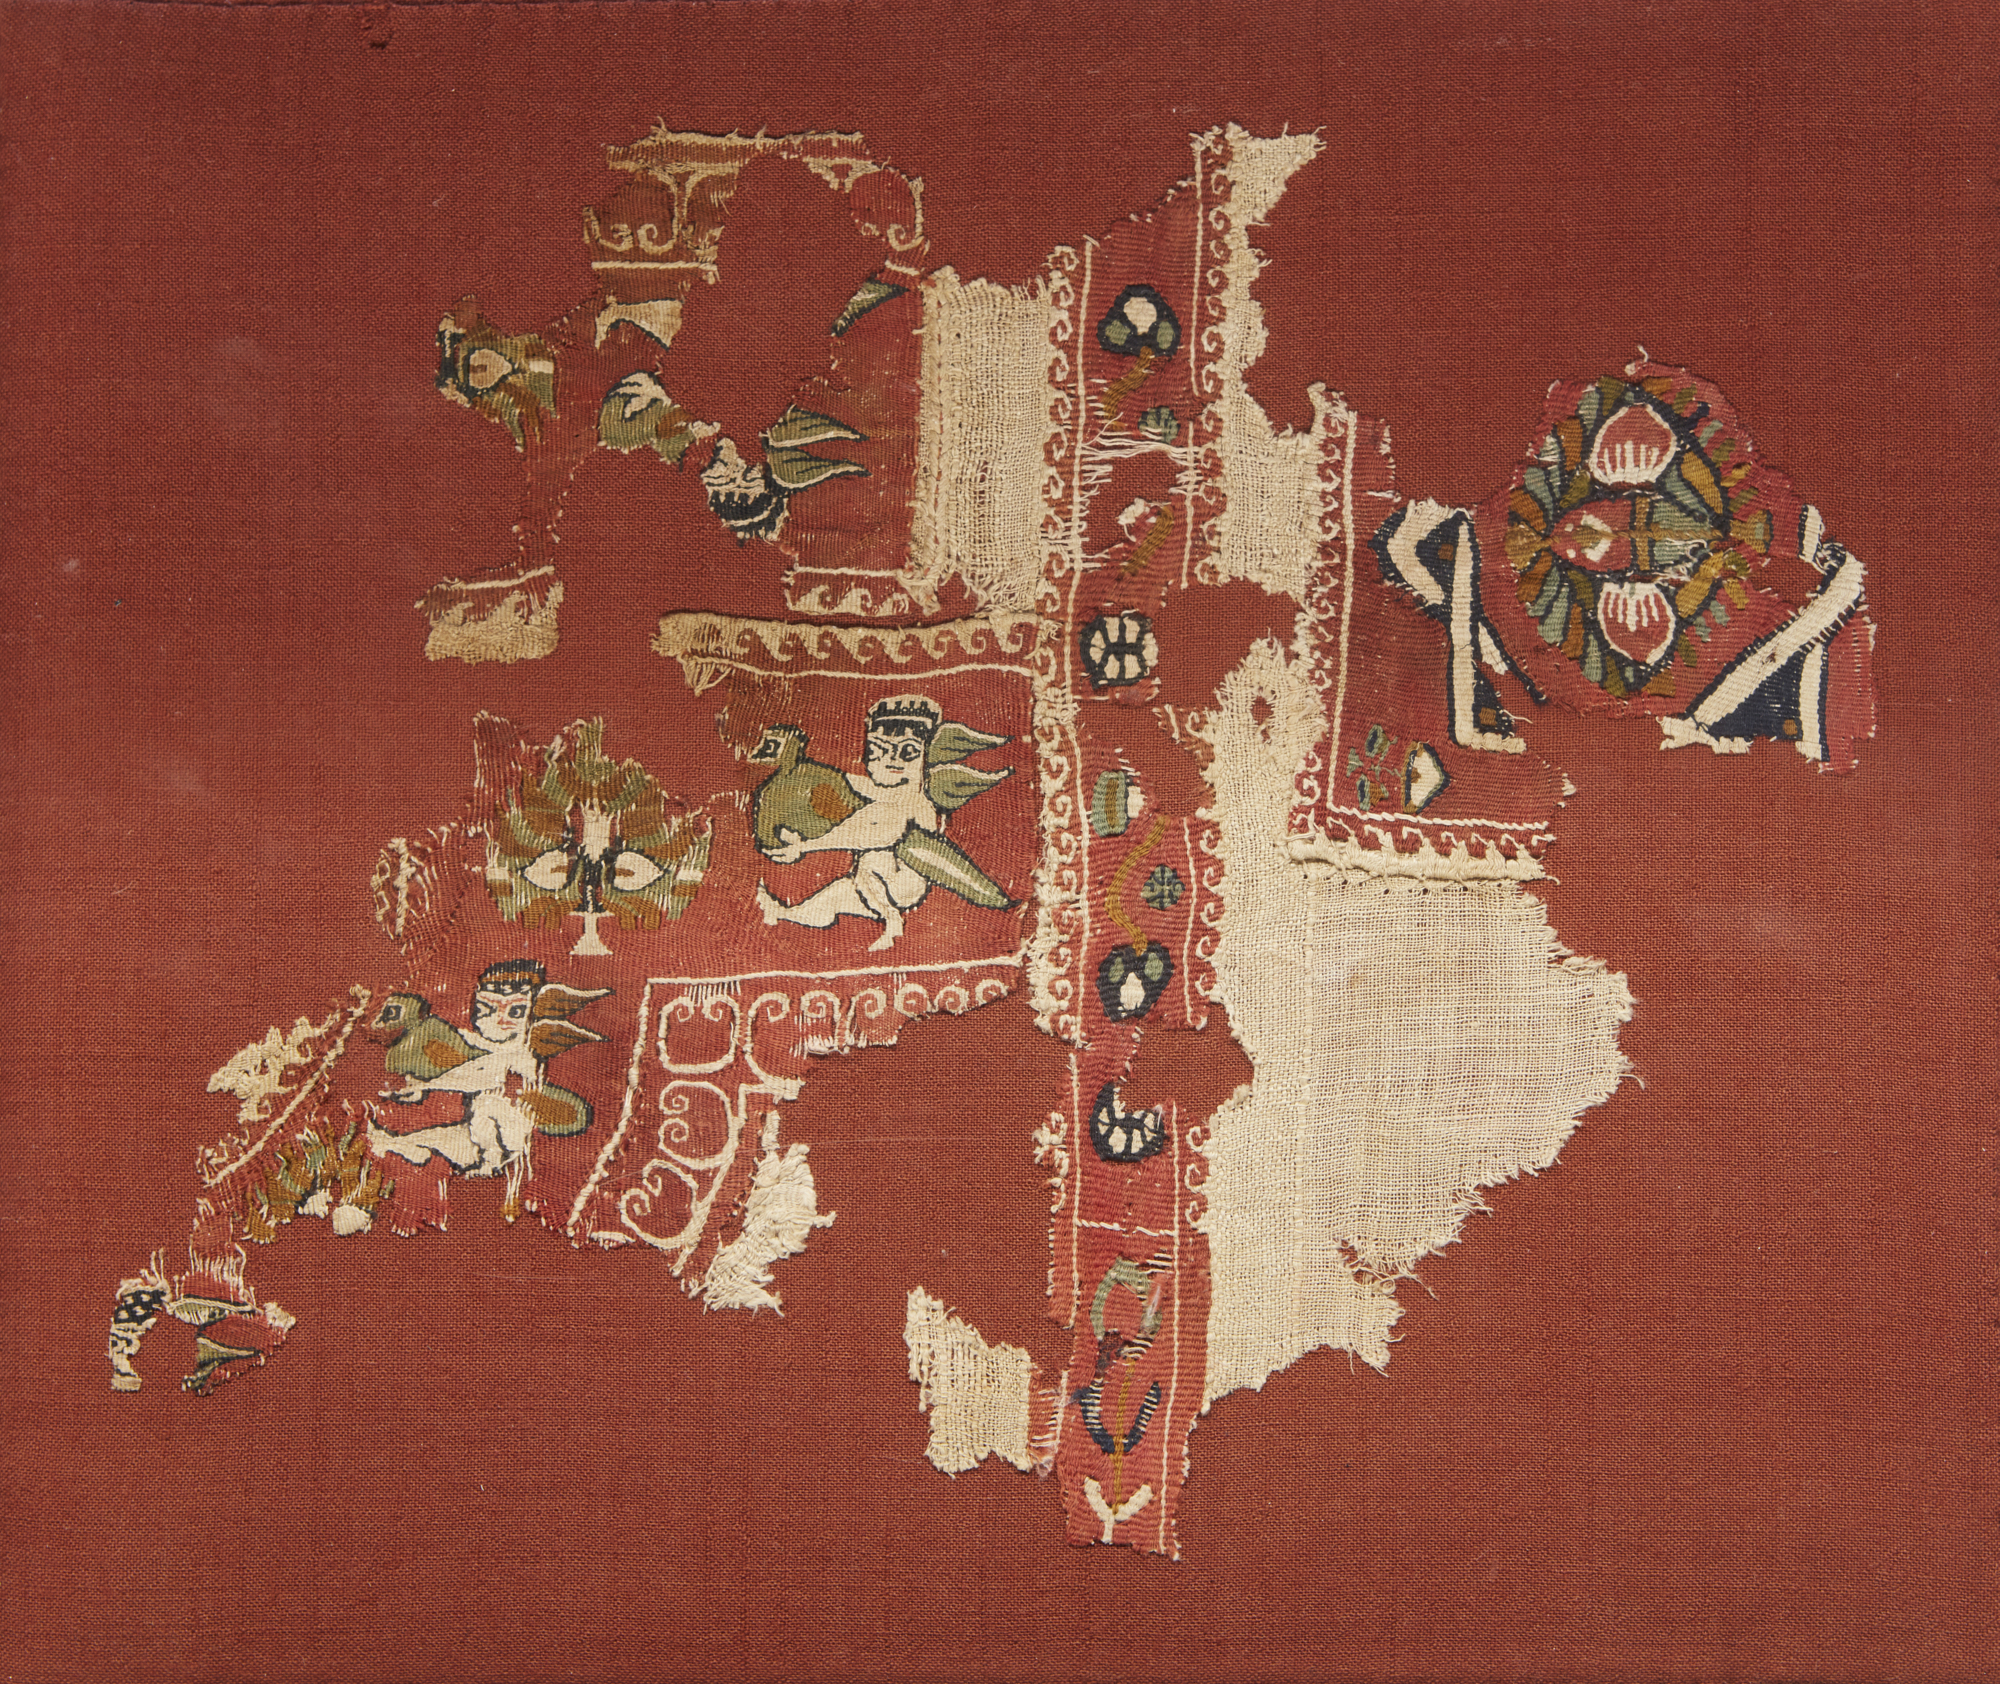 A Group of Important Works - To be sold Without Reserve A Coptic textile fragment, circa 6th cen...